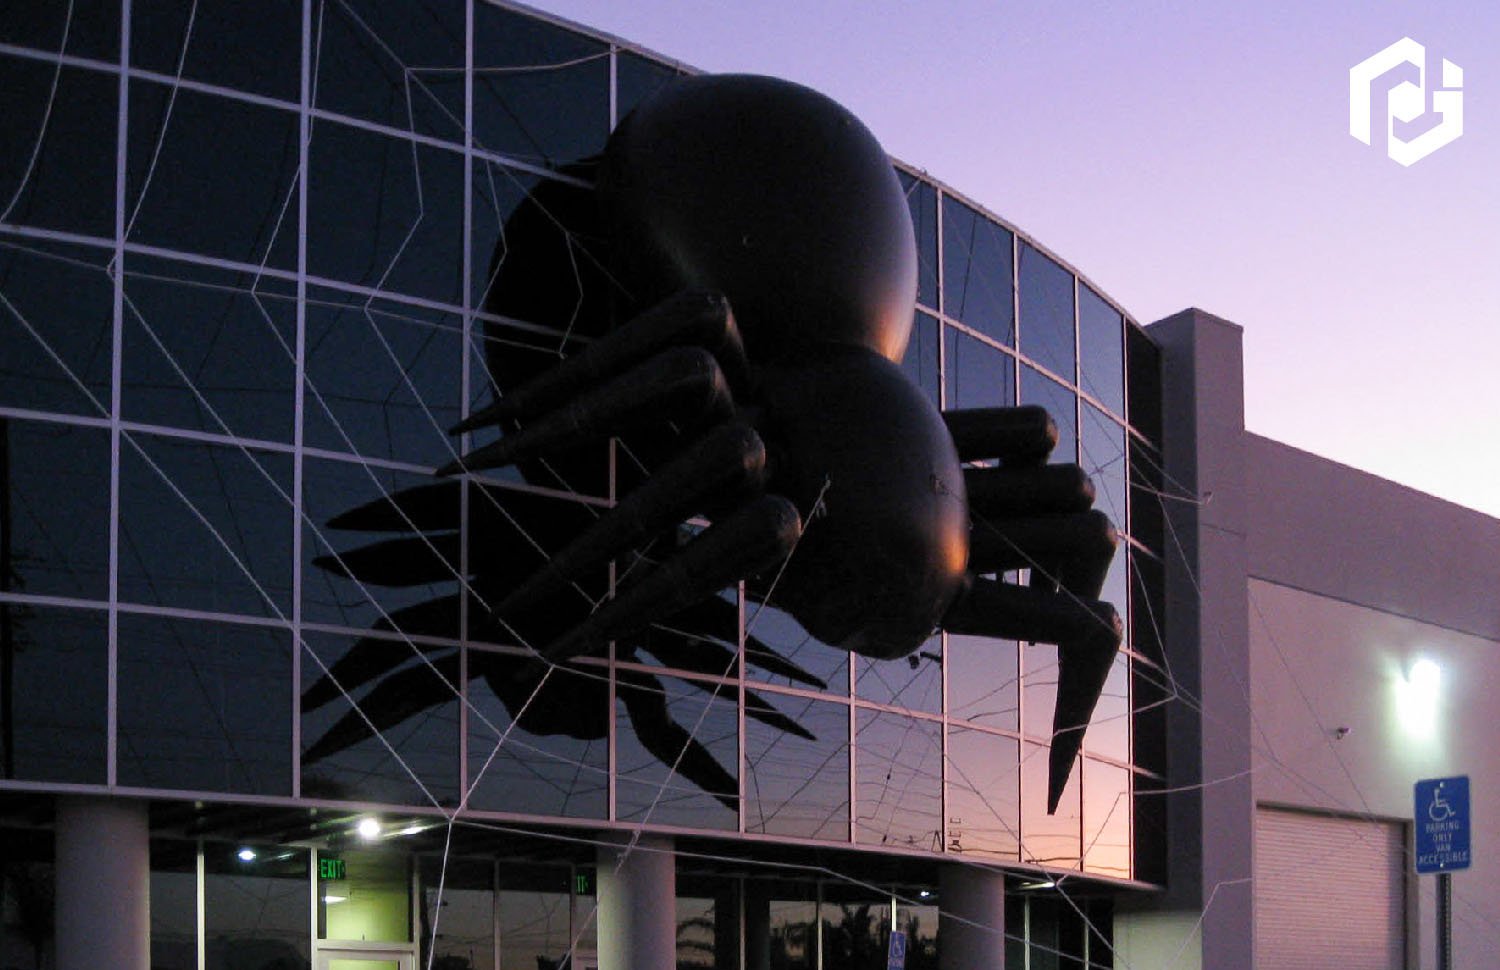 25-foot-spider-on-building